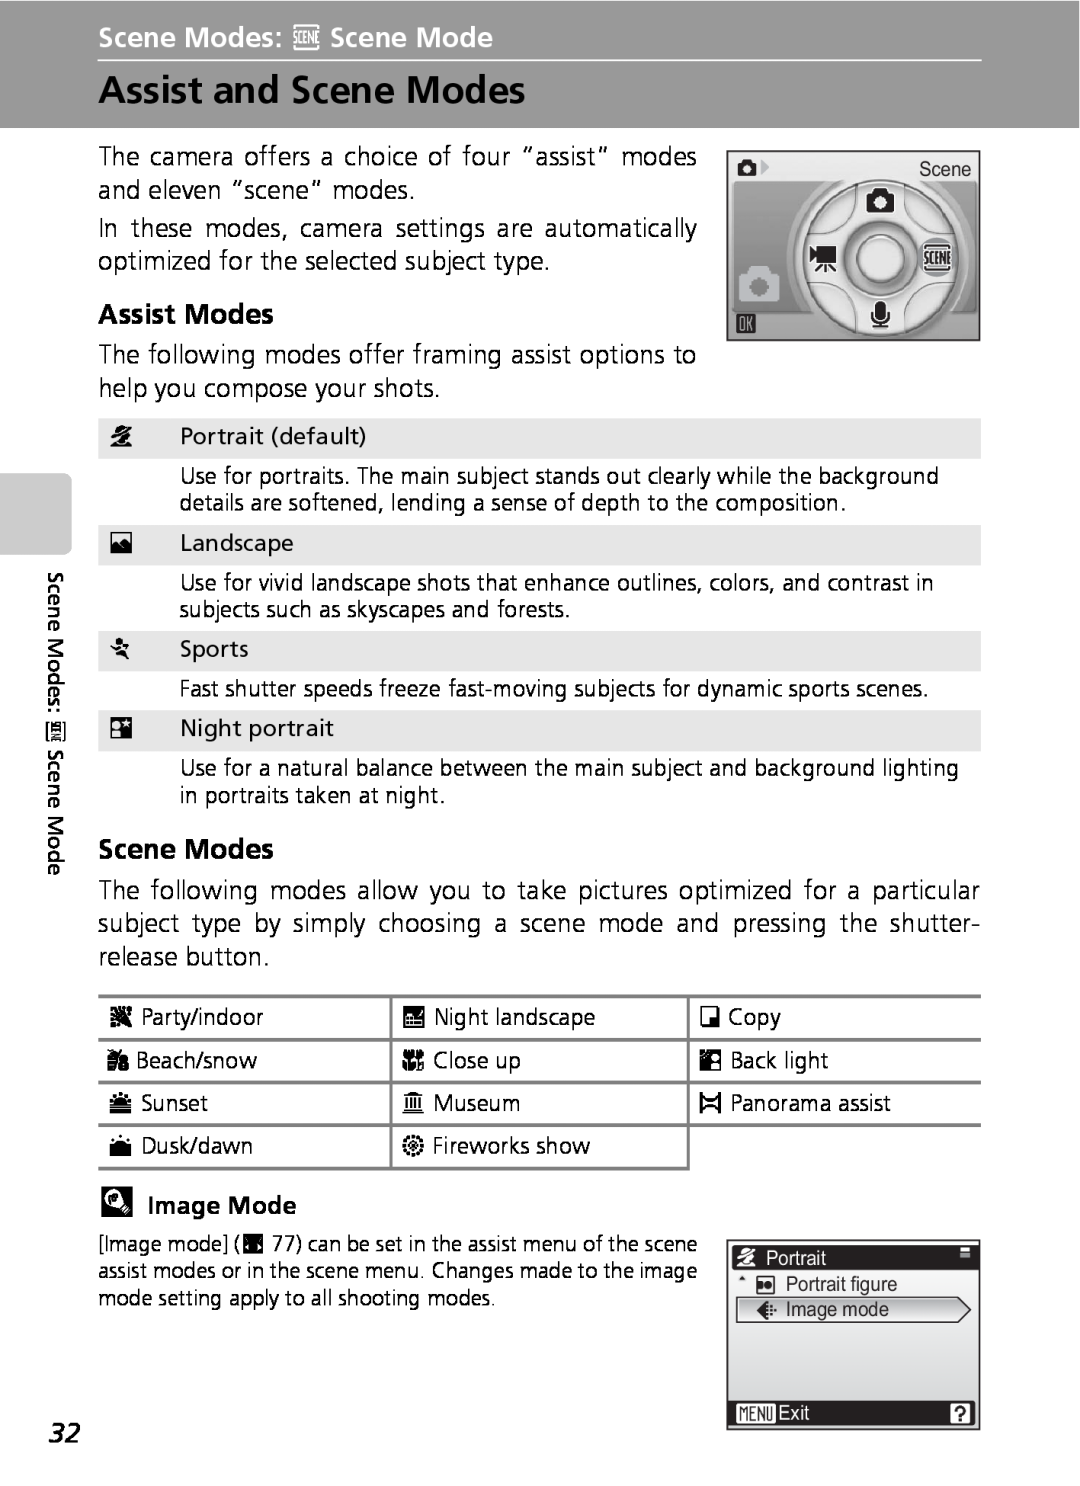 Nikon COOLPIXS9 manual Assist and Scene Modes, Scene Modes: n Scene Mode, Assist Modes, lImage Mode 